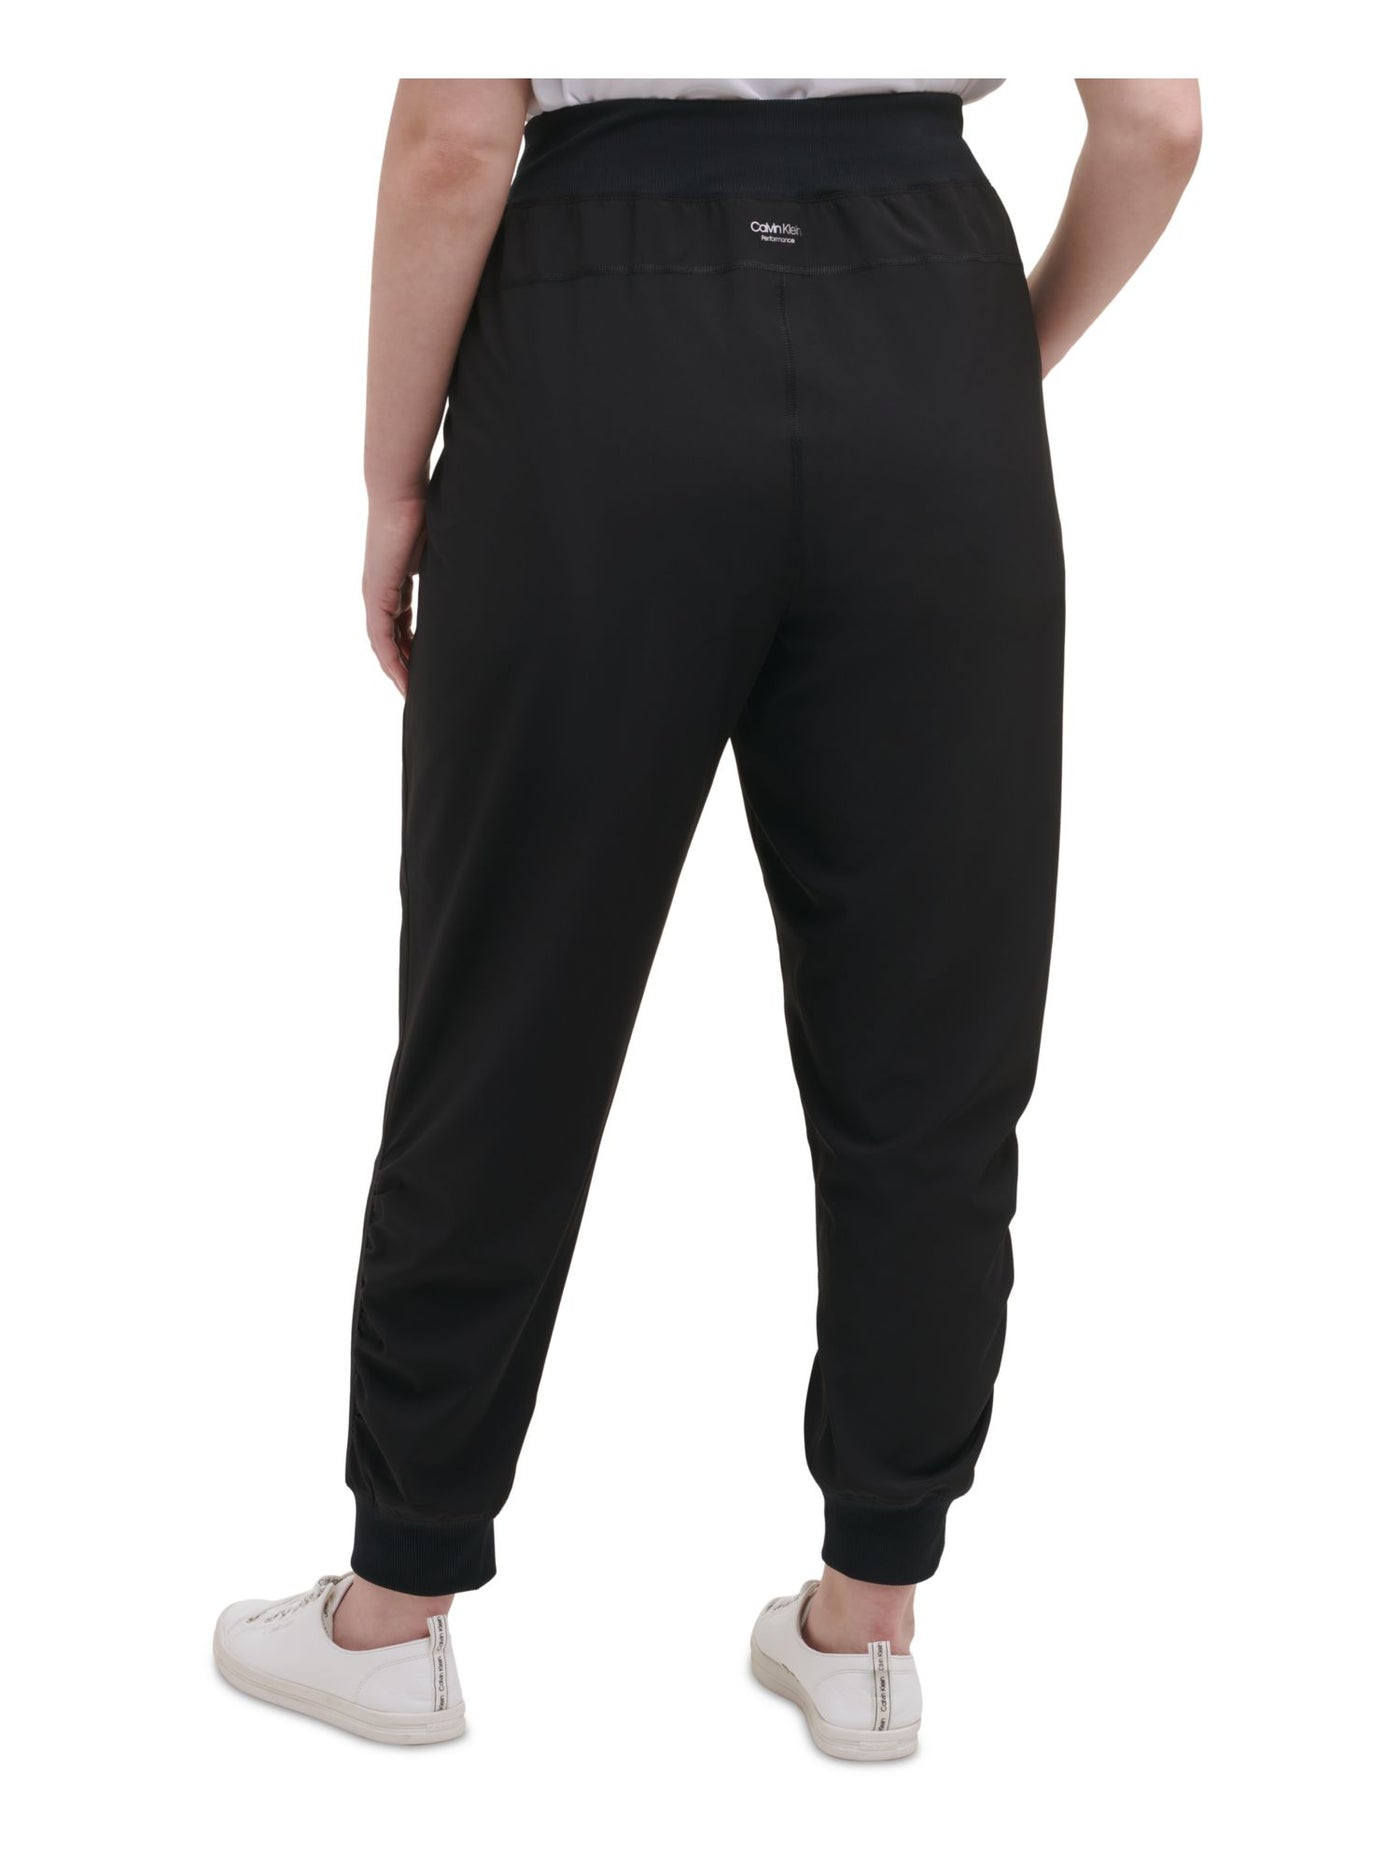 CALVIN KLEIN PERFORMANCE Womens Black Stretch Tie Ribbed Mid Rise Cinched Side Hems Cropped Pants Plus 1X